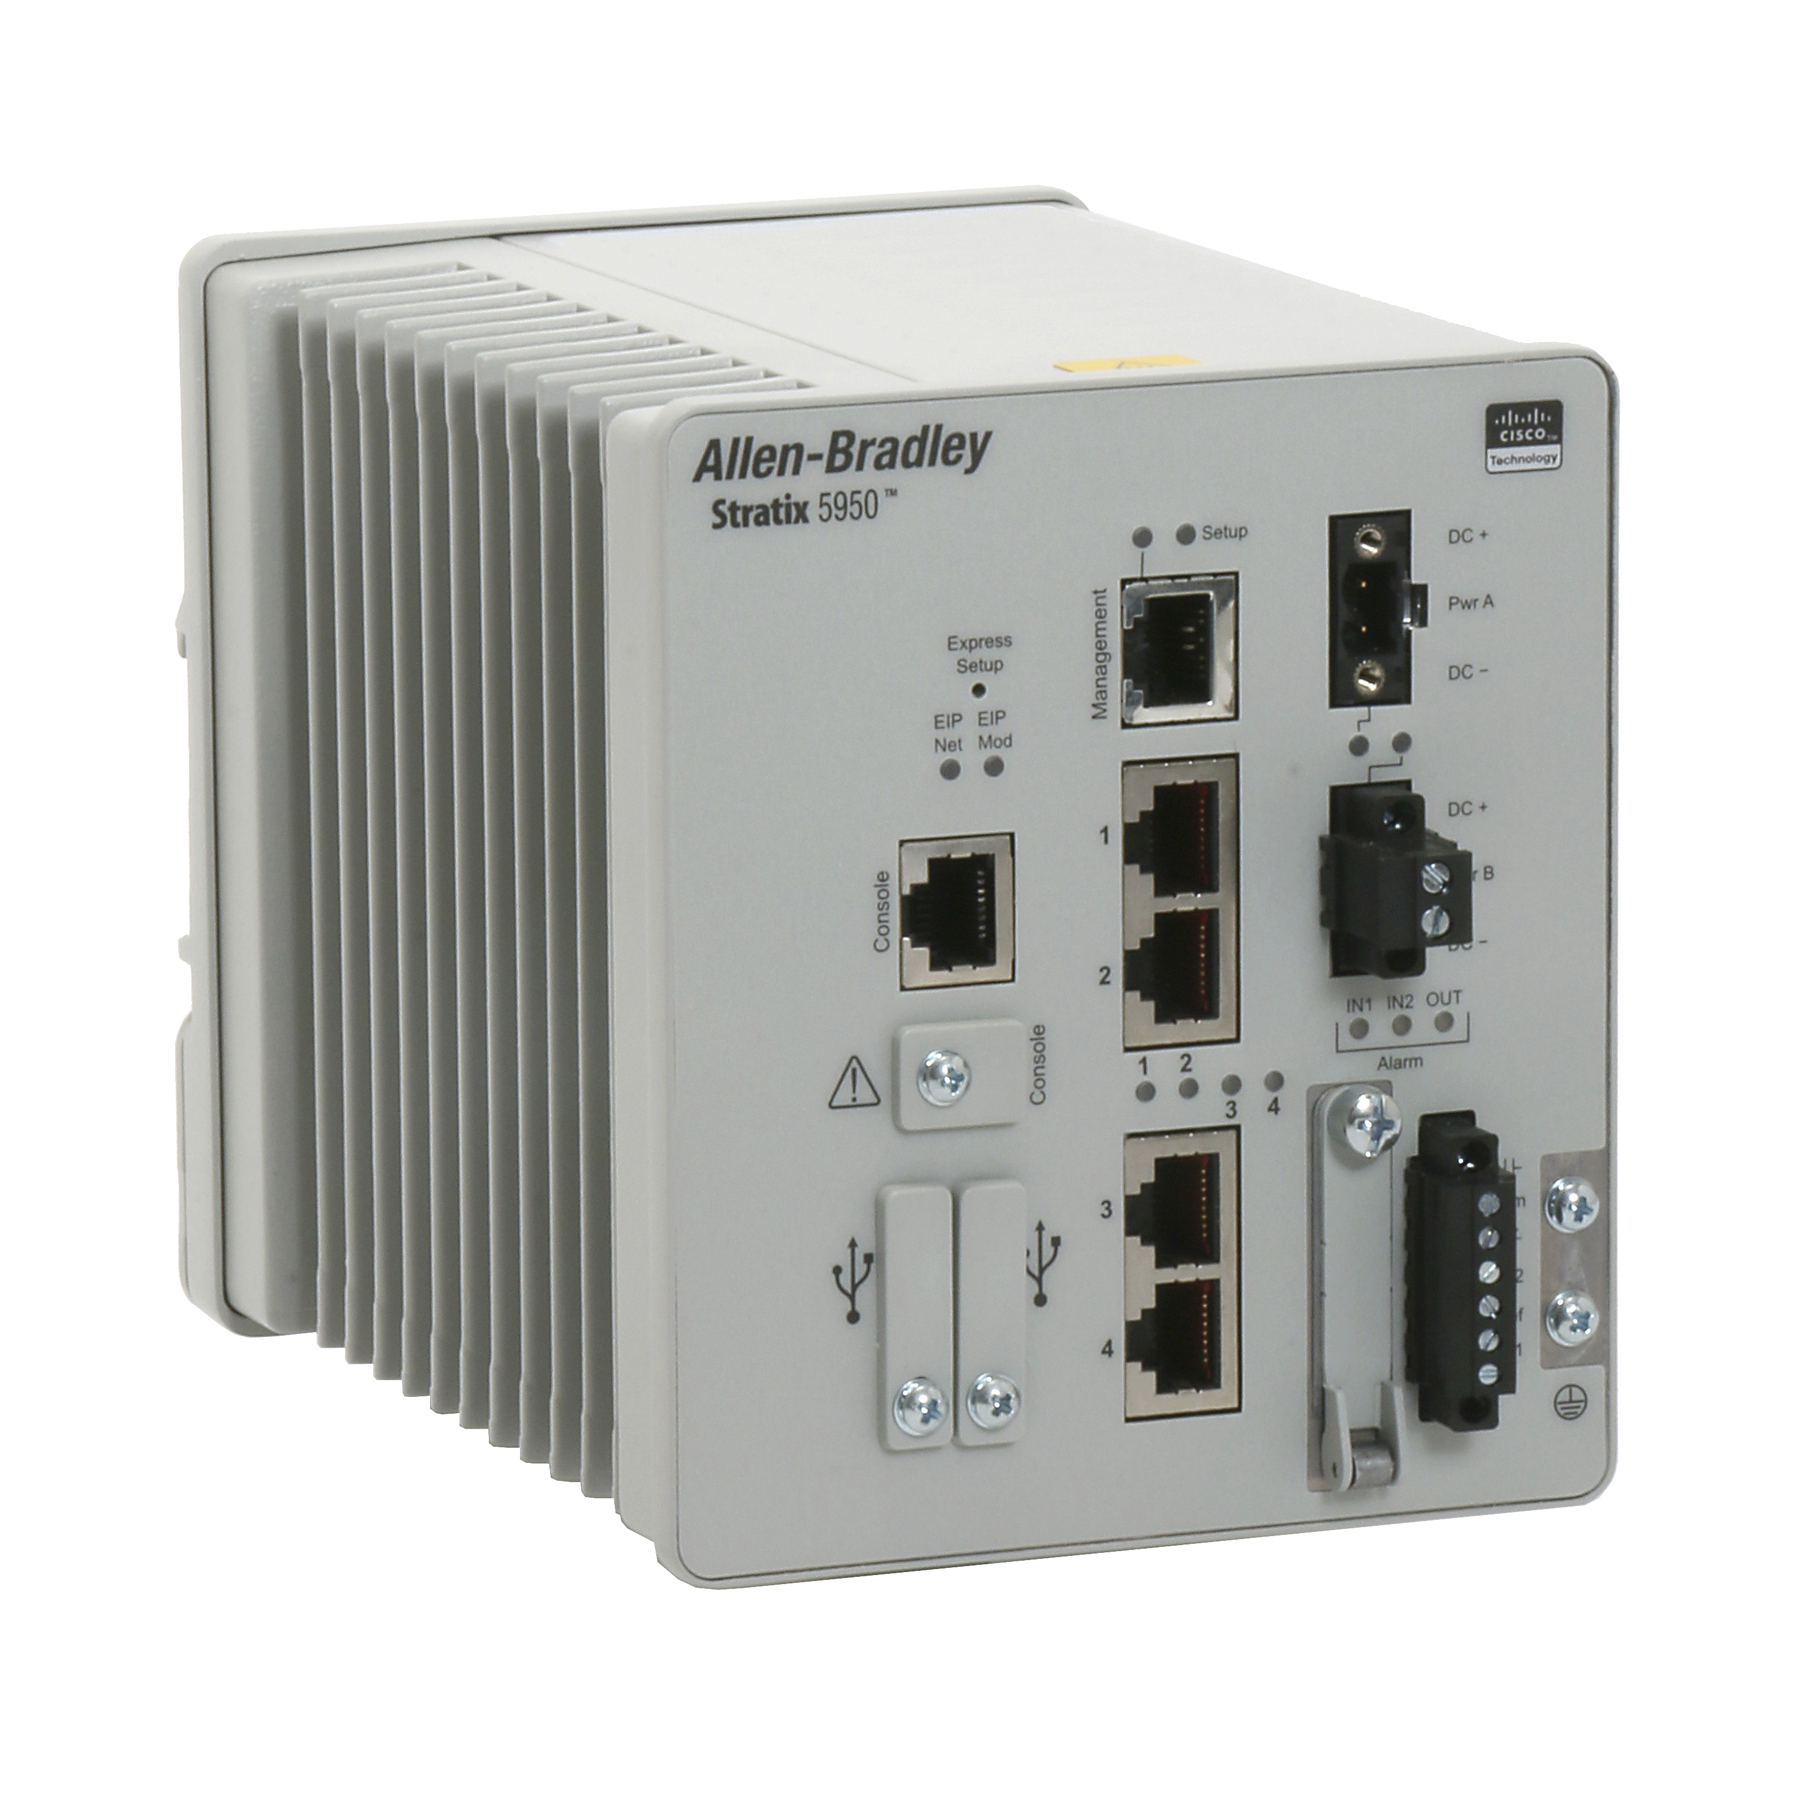 Rockwell Automation launches new industrial security appliance